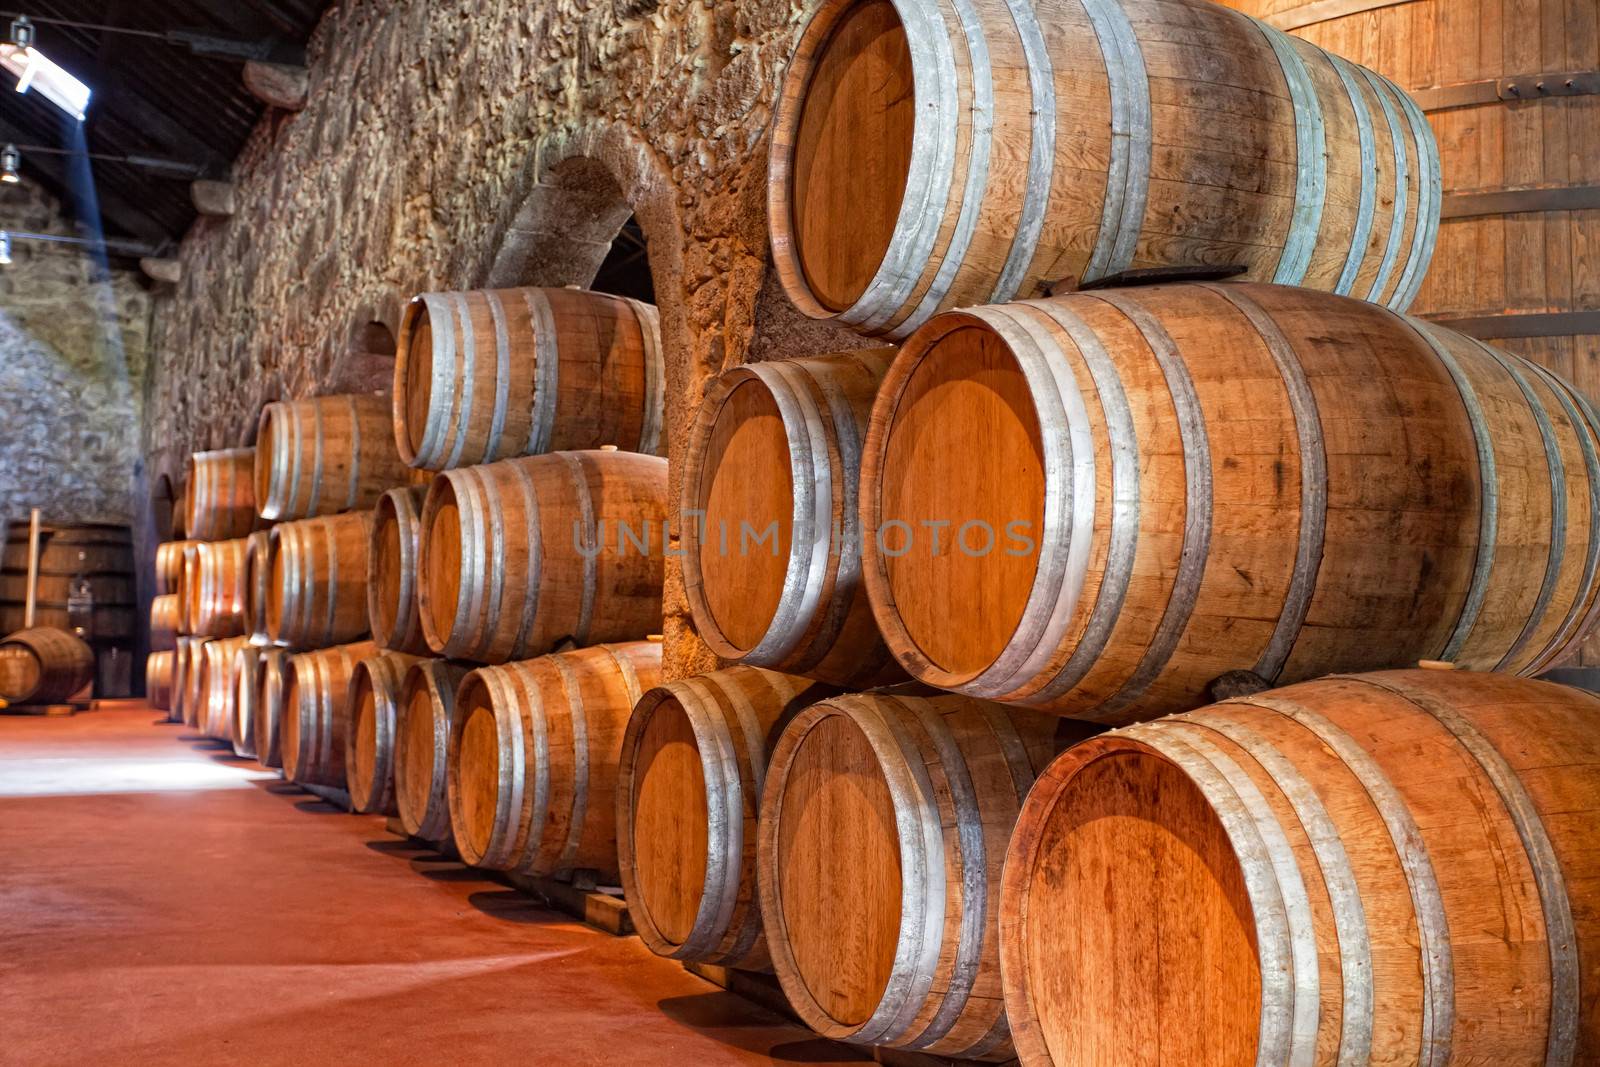 olden casks of different sizes hold Port fortified wine to mature in wine cellars